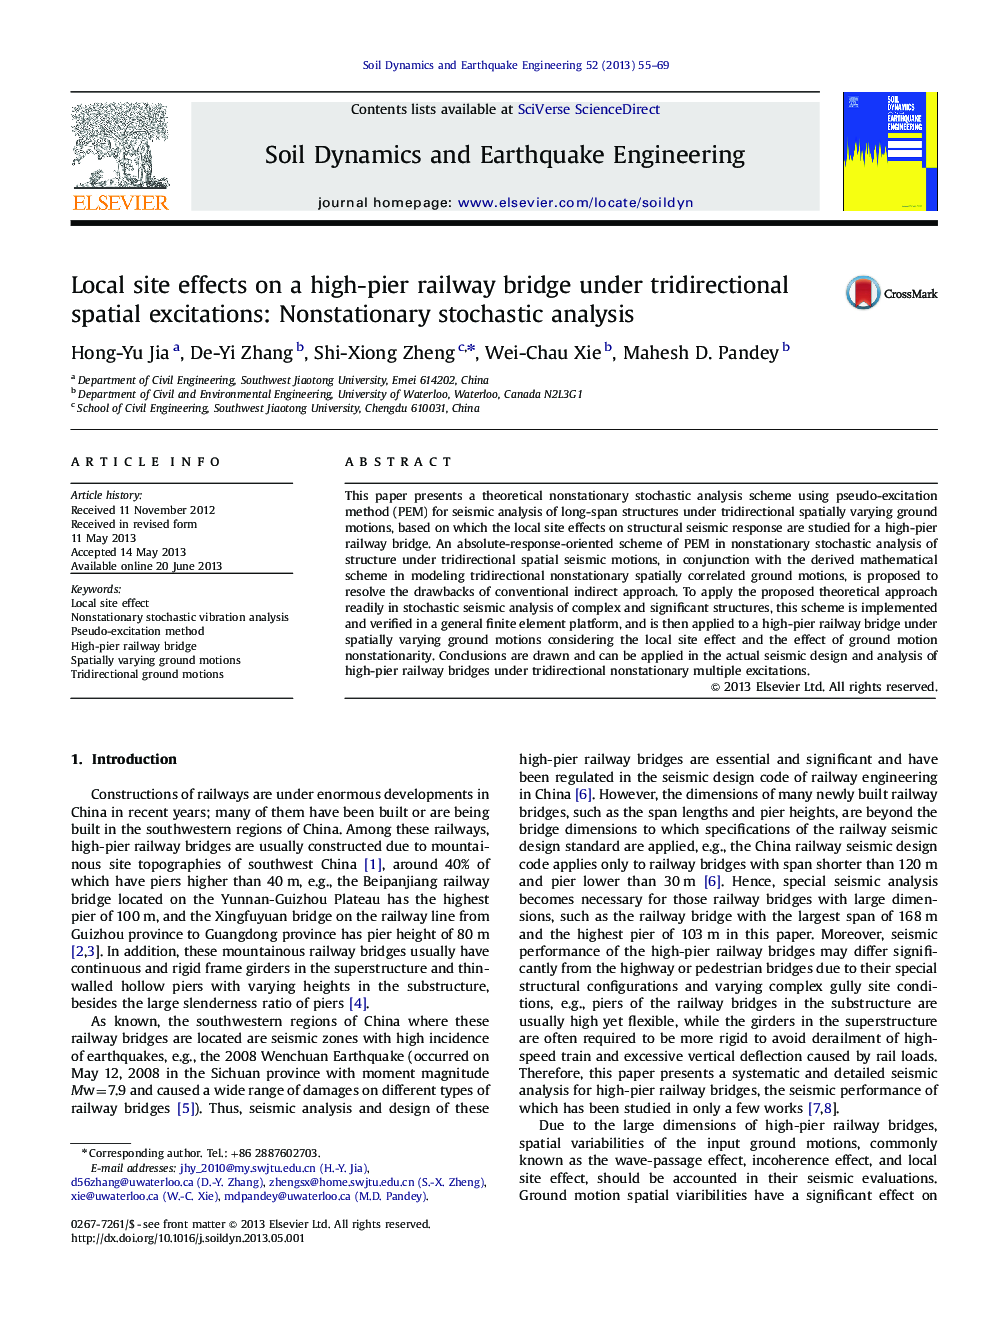 Local site effects on a high-pier railway bridge under tridirectional spatial excitations: Nonstationary stochastic analysis